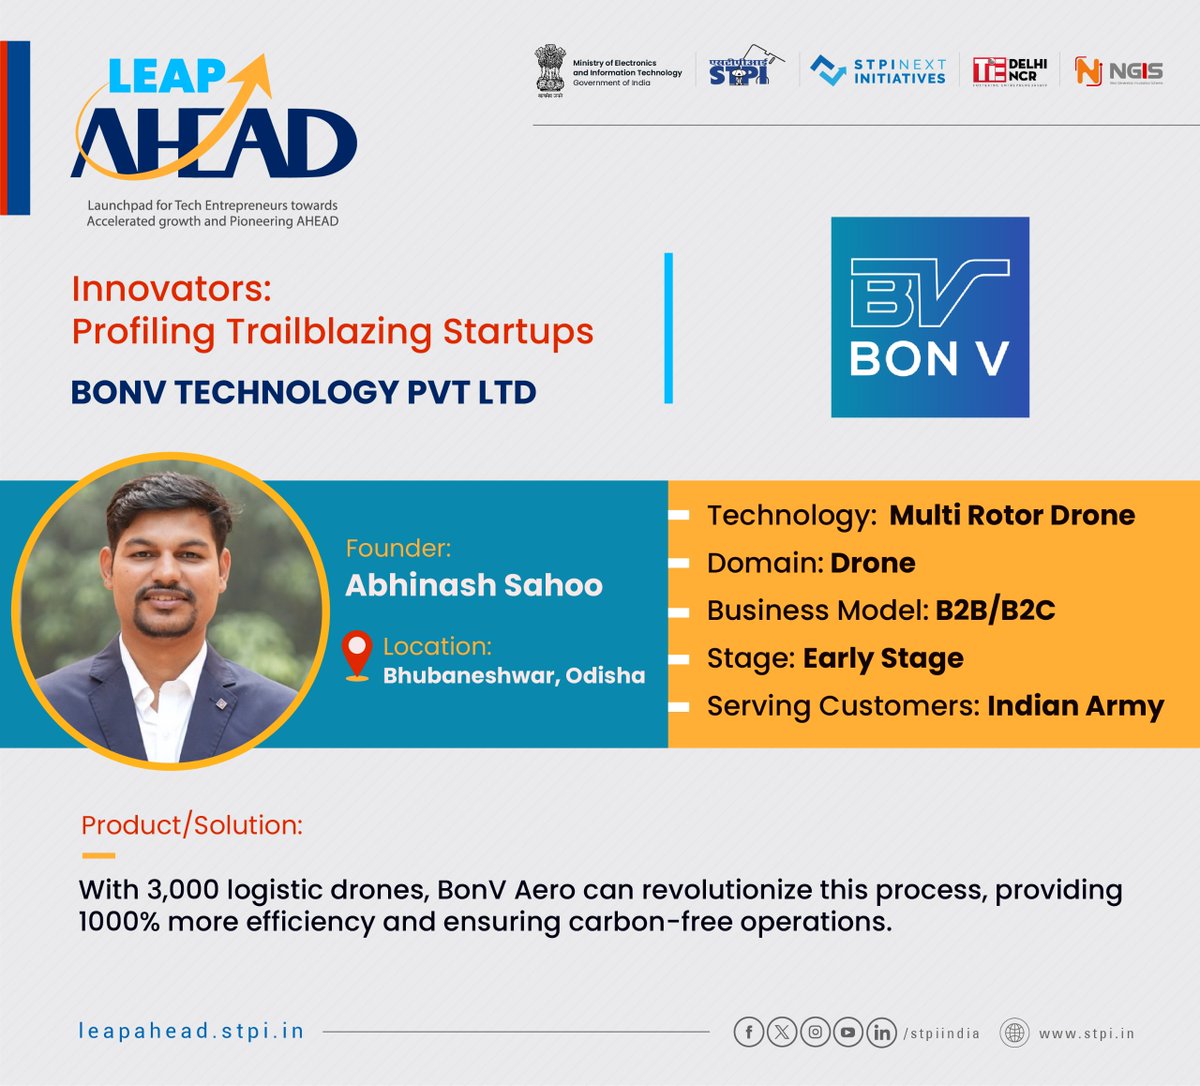 Startup M/s @BONVCommunicat1, one of the 75+ selected companies for LEAP AHEAD Cohort, is revolutionising air mobility with 3,000 logistic drones that cater to Indian defence, modernizing disaster response, medical emergencies, and quick commerce deliveries.